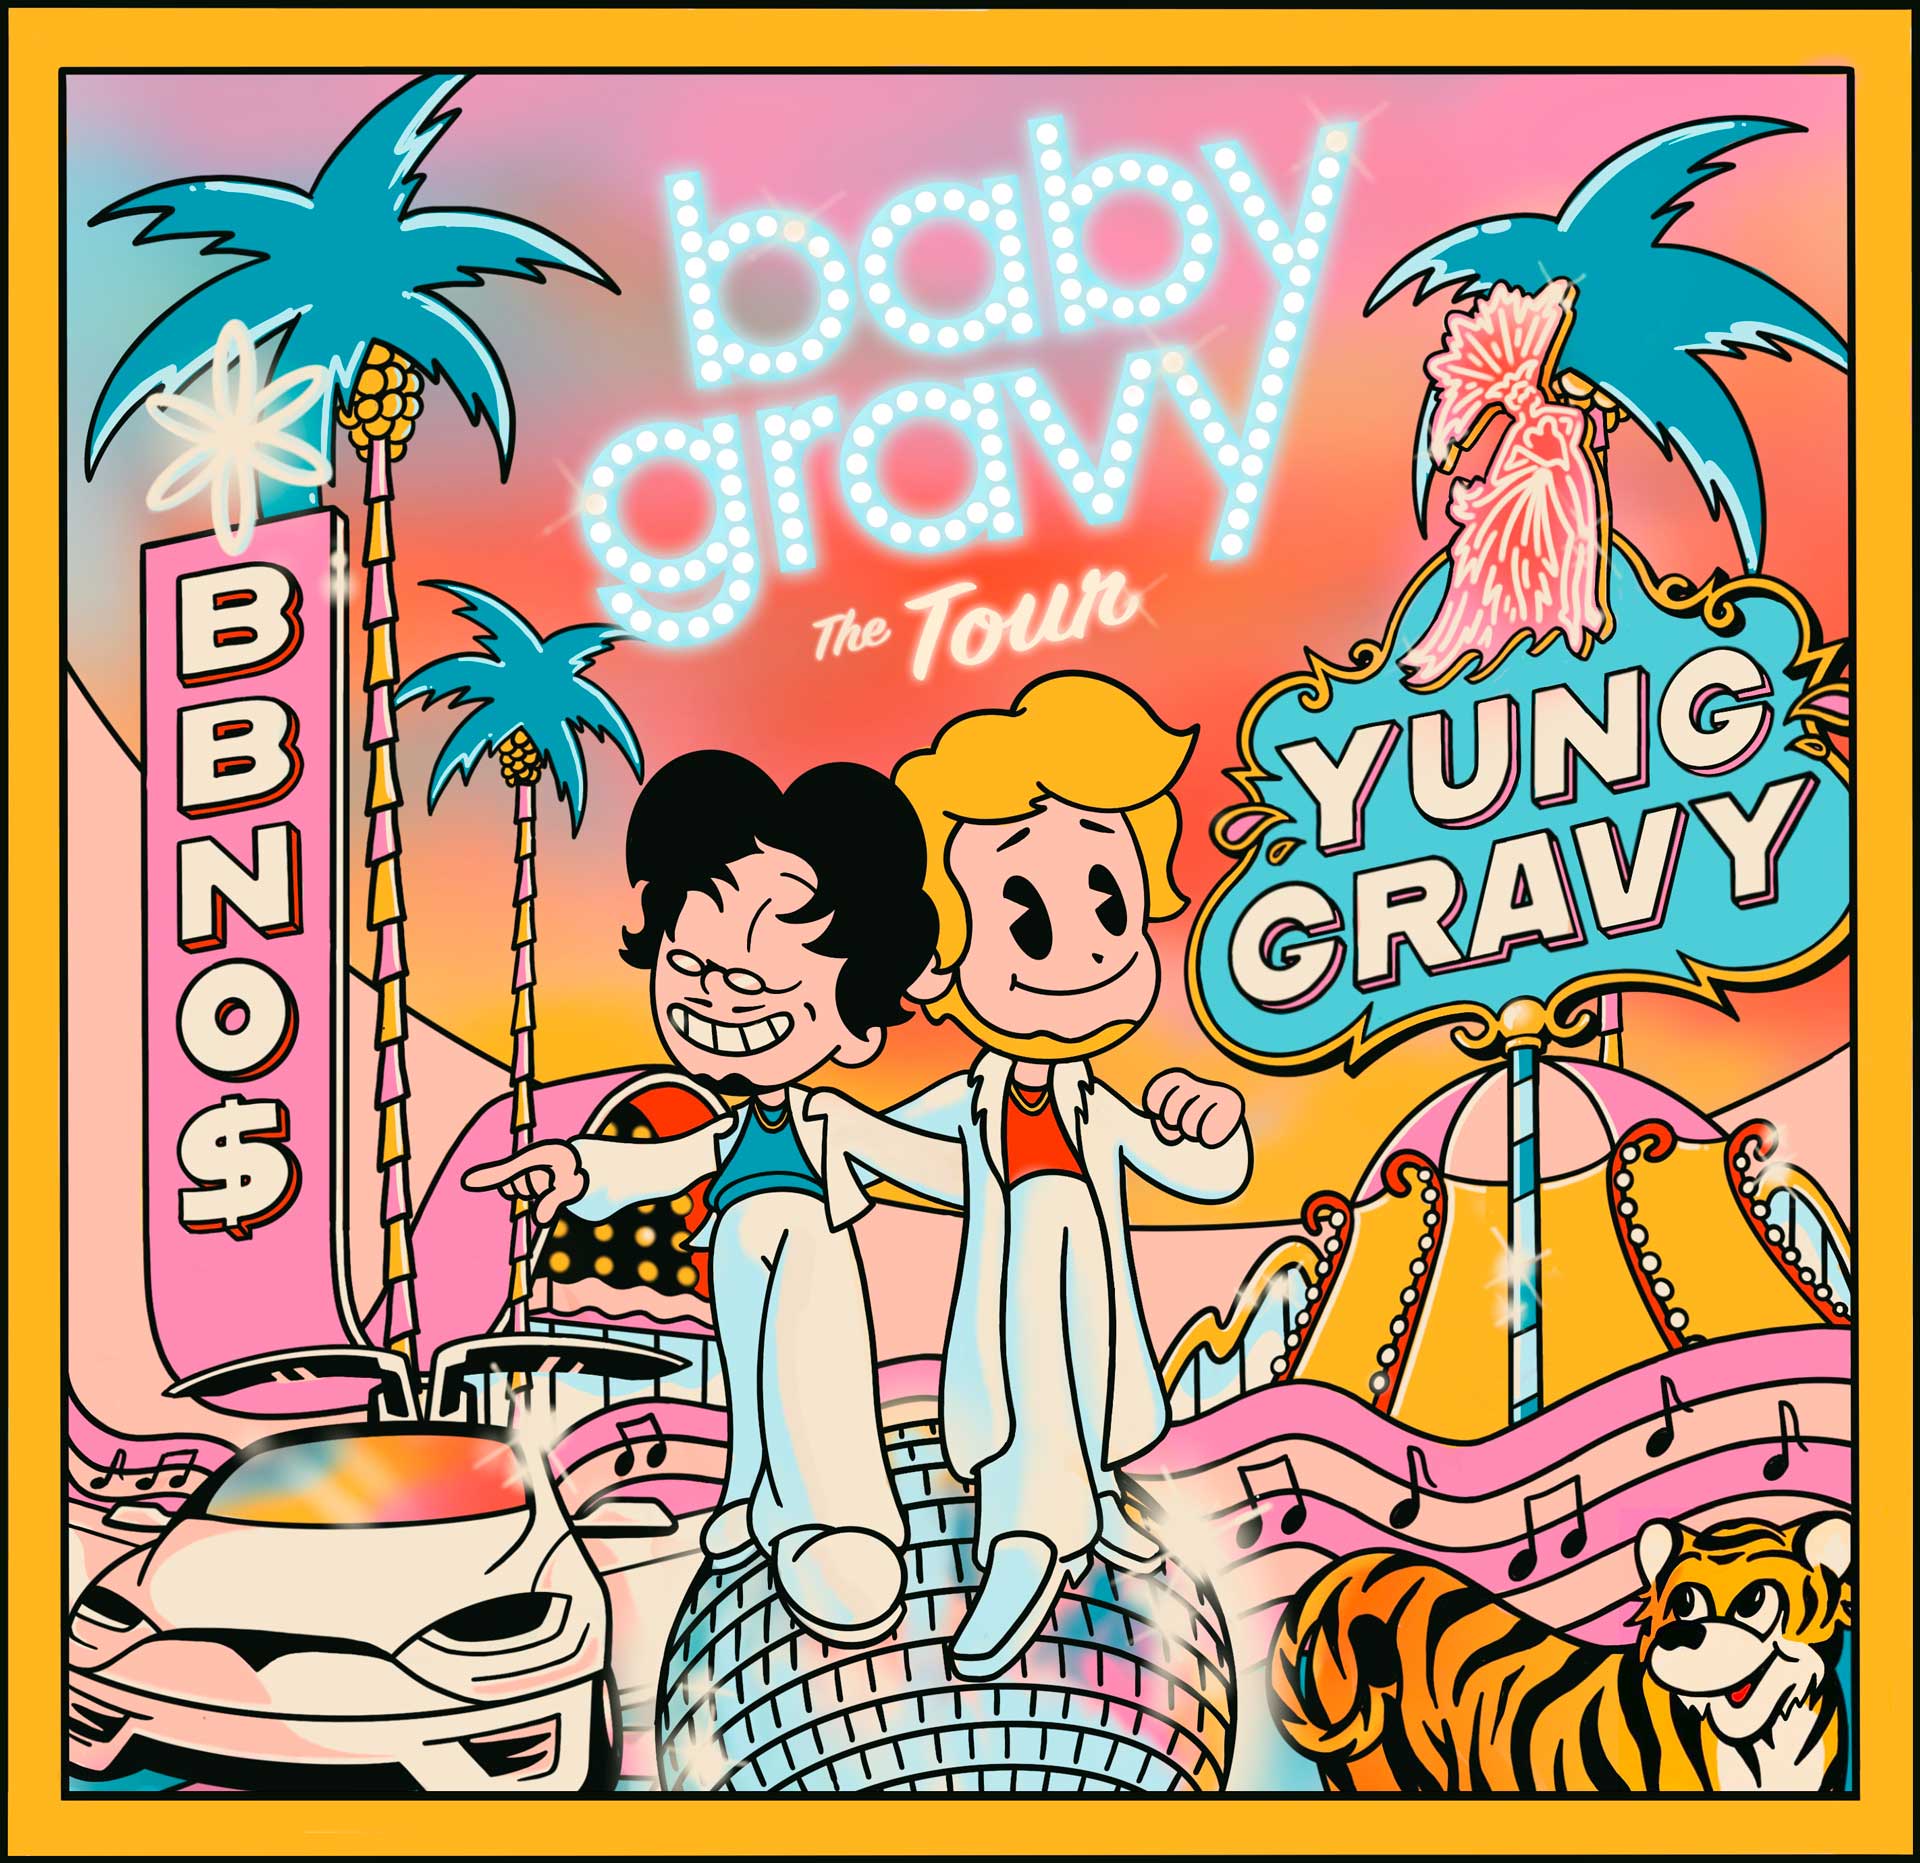 Yung Gravy Concerts Locations